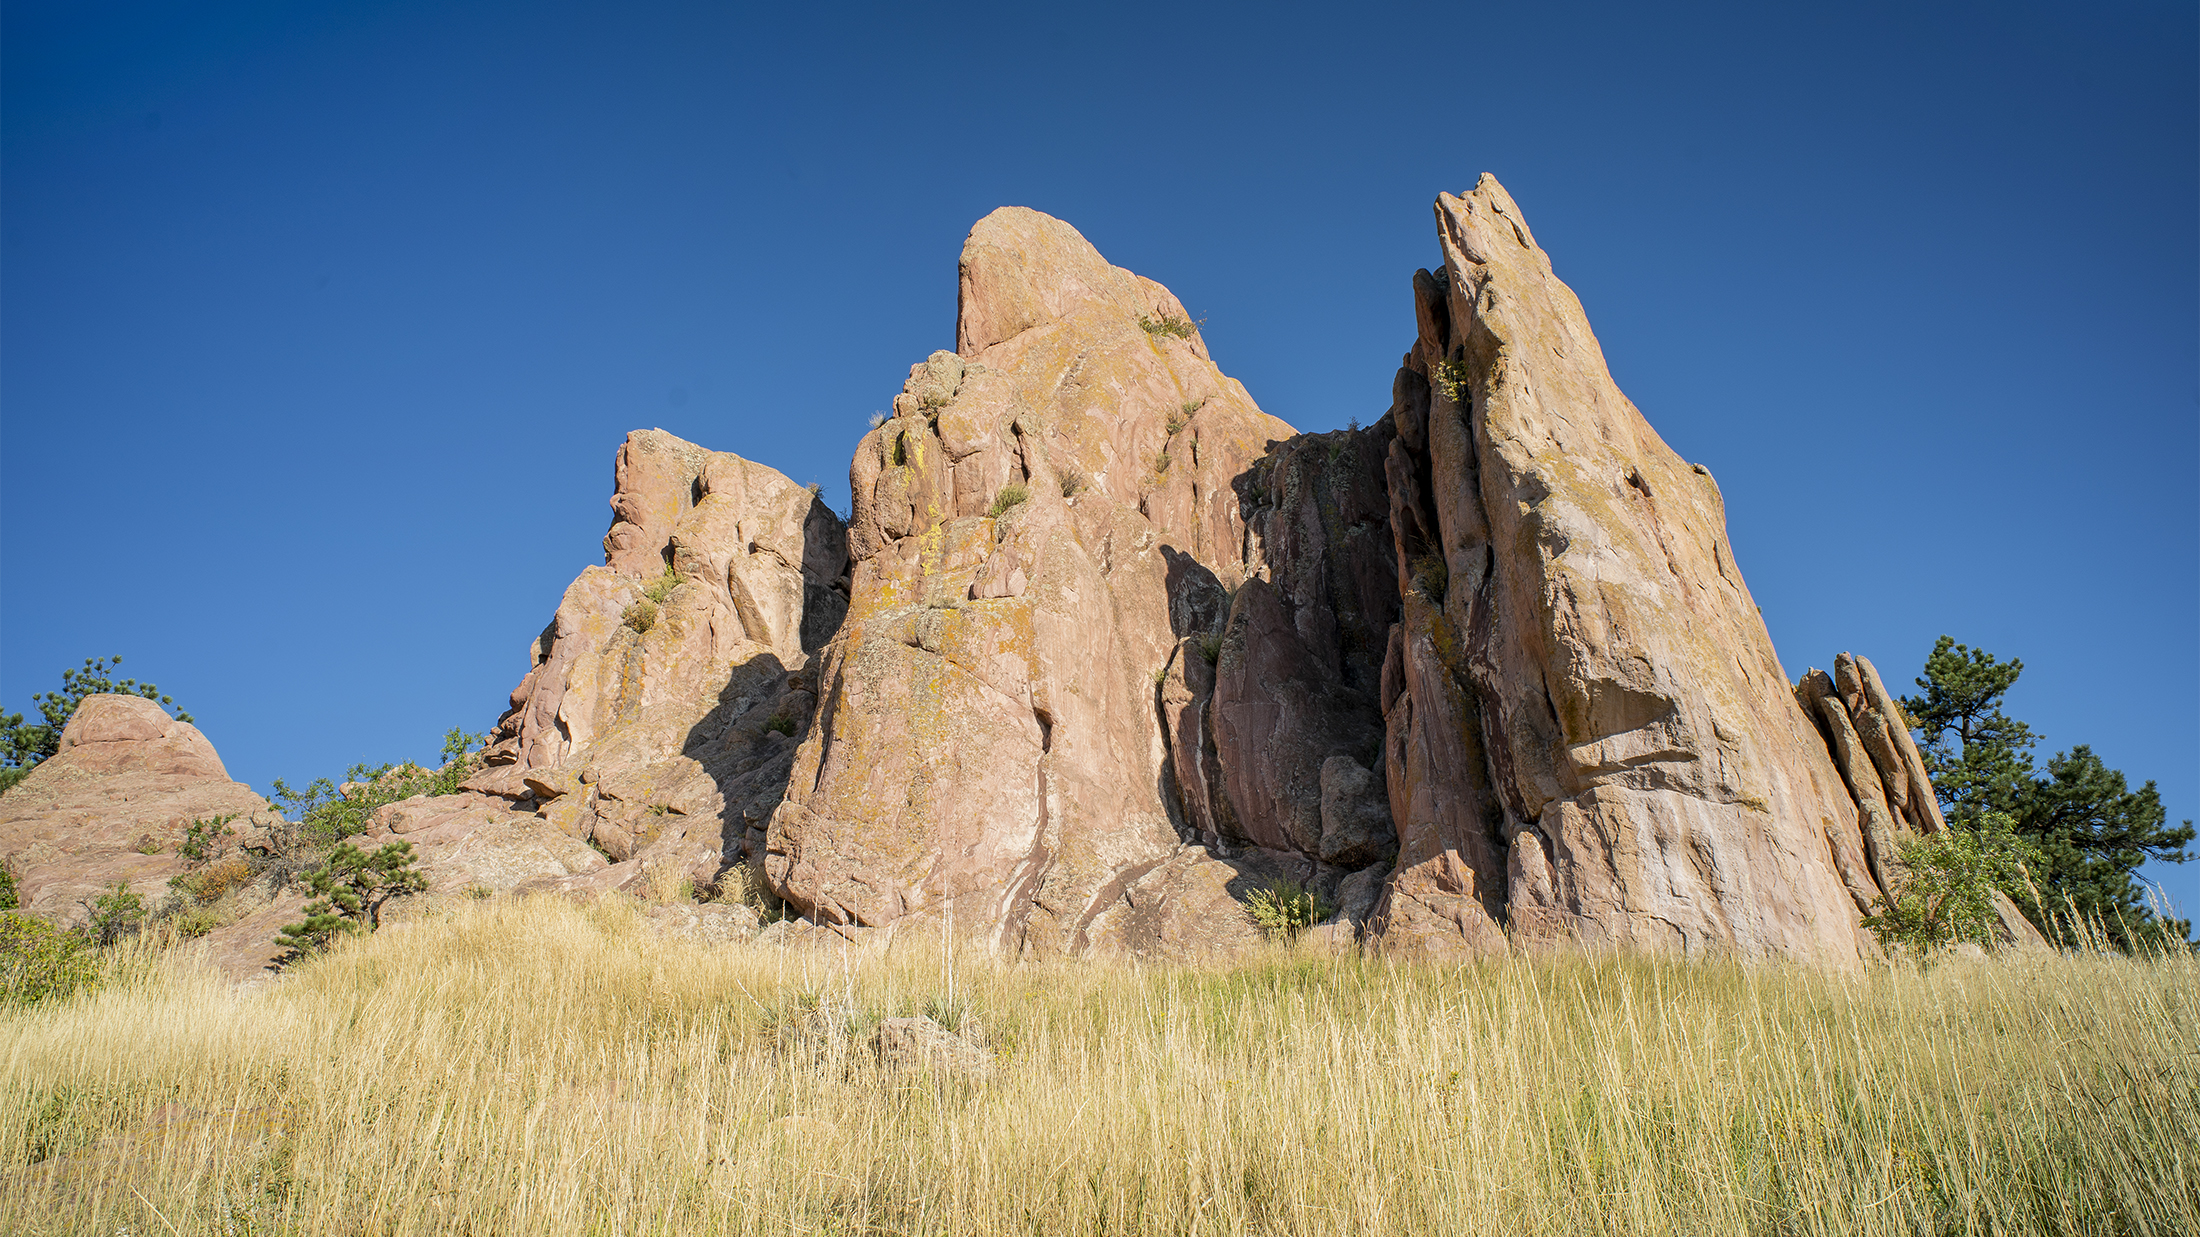 The Red Rocks formation in The Peoples' Crossing in west Boulder